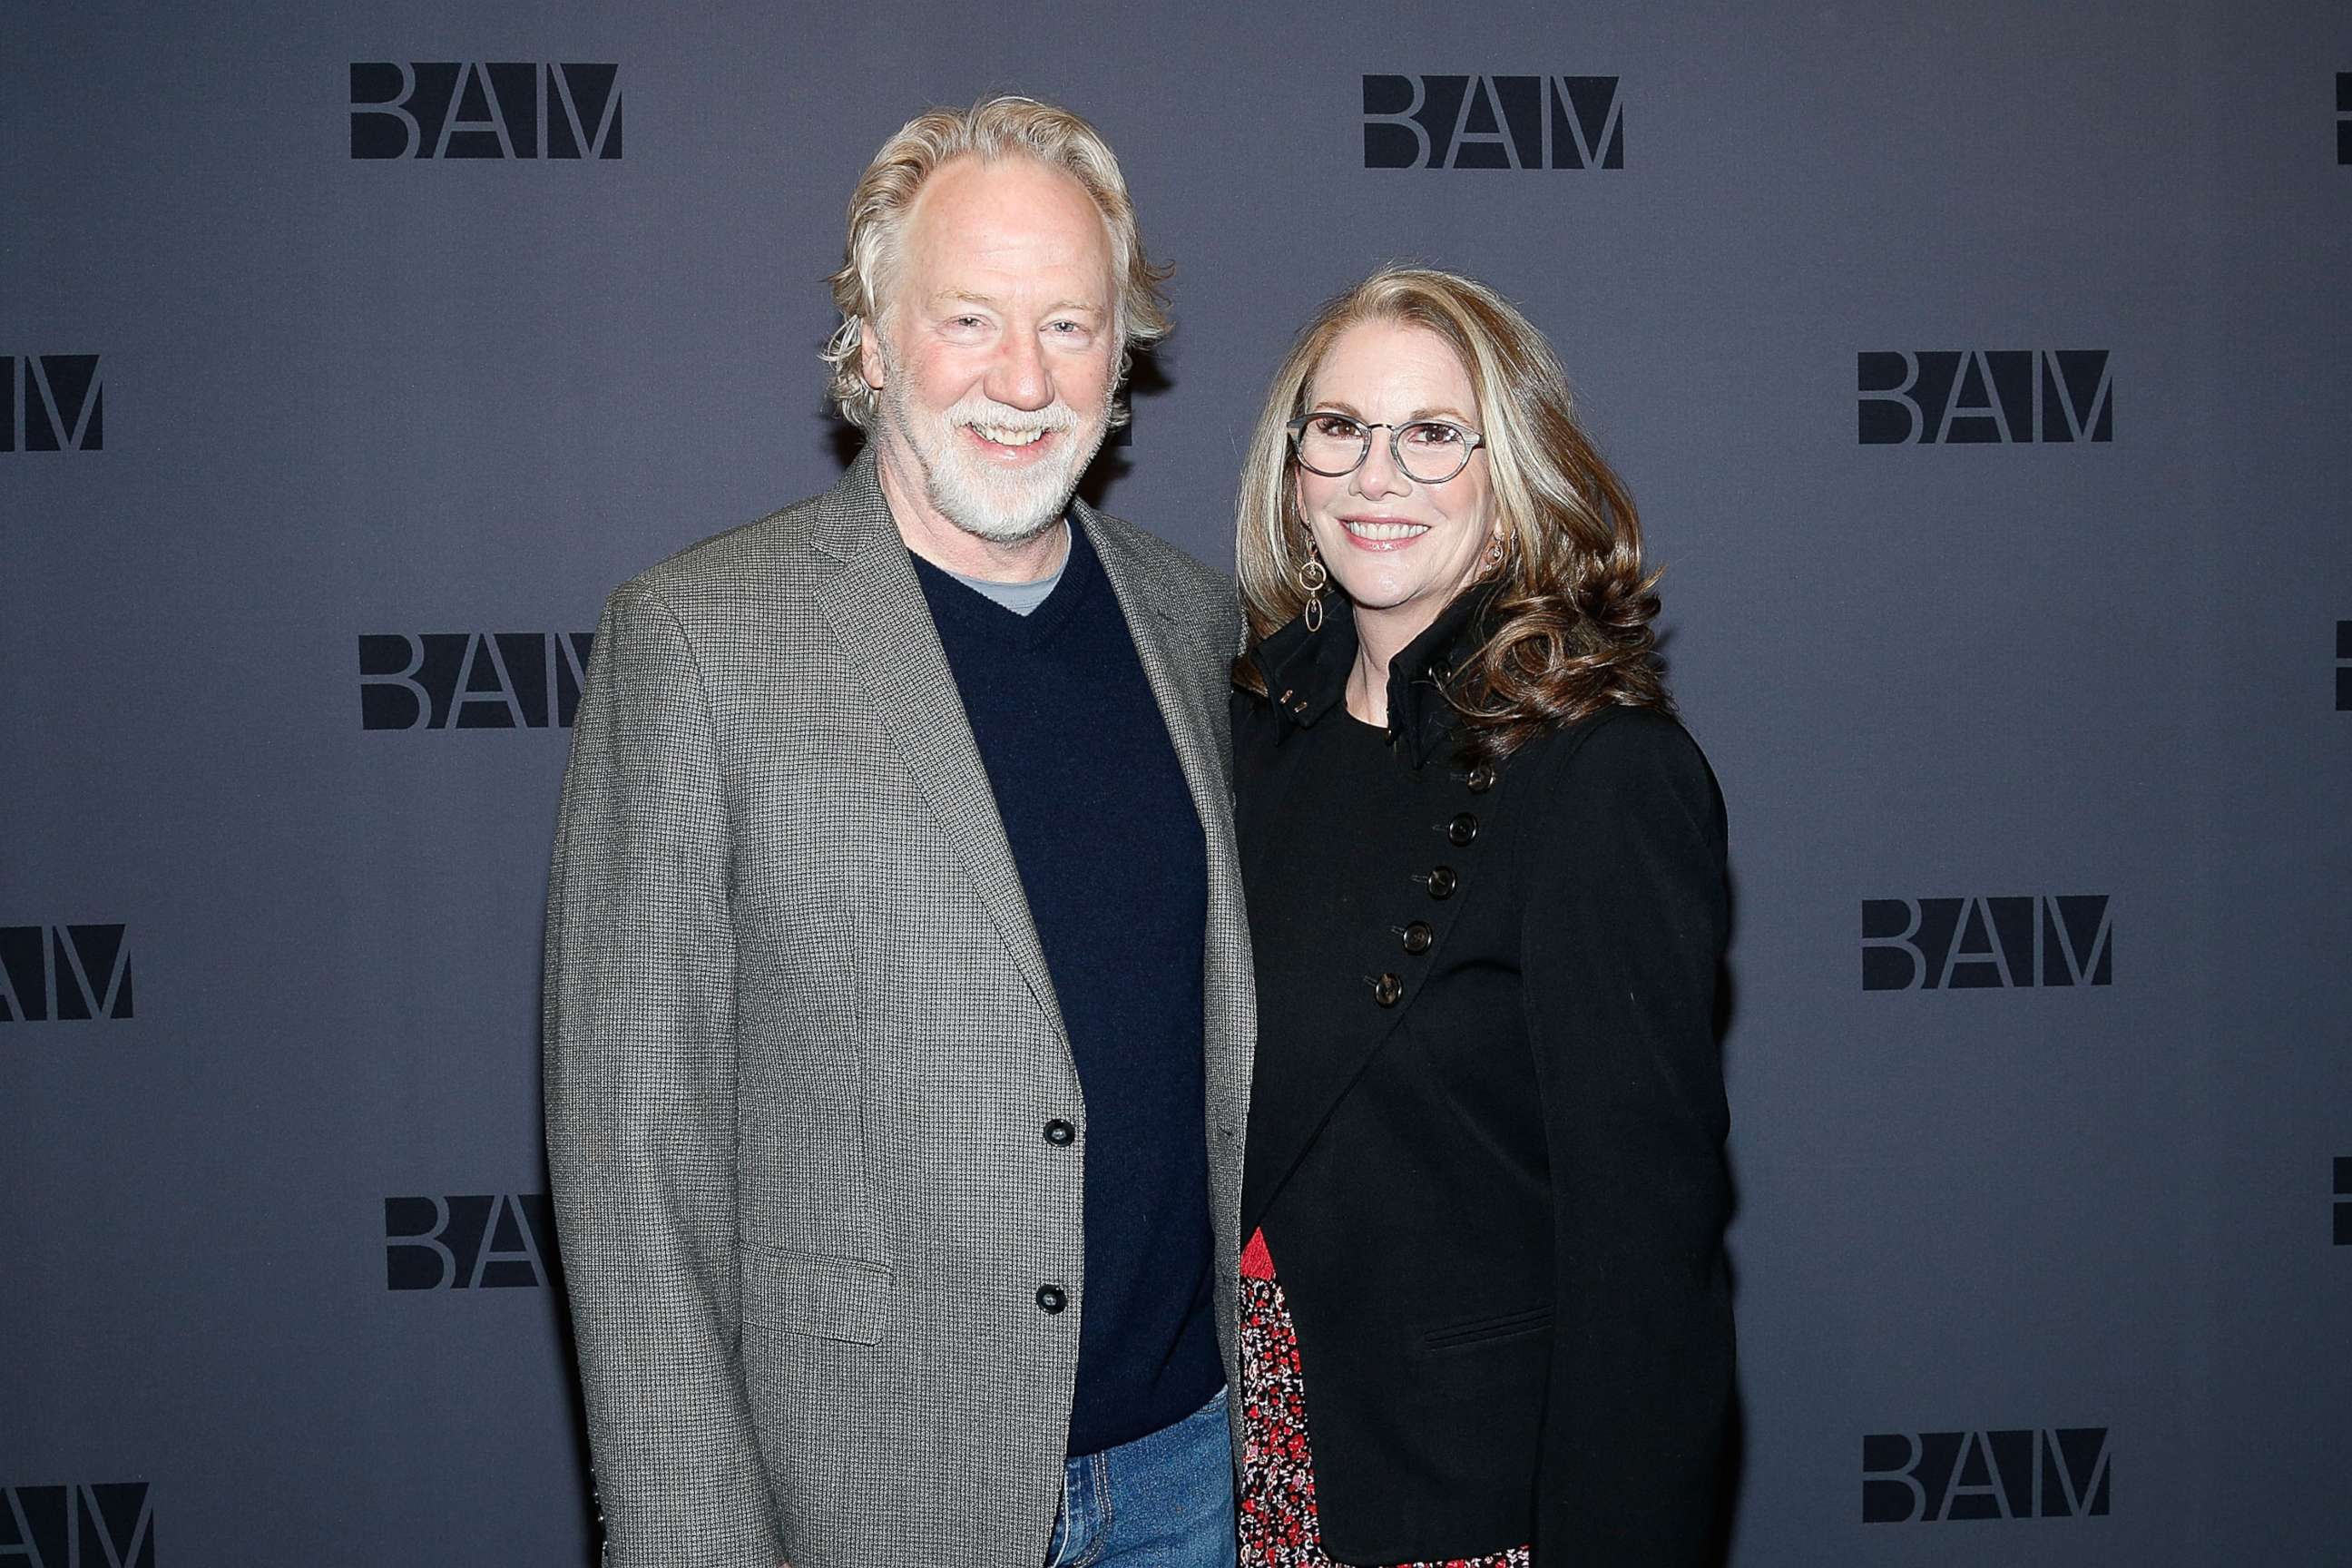 PHOTO: Actor Timothy Busfield and actress Melissa Gilbert attend the opening night party for "Medea" at the BAM Harvey Theater, Jan. 30, 2020, in New York City.